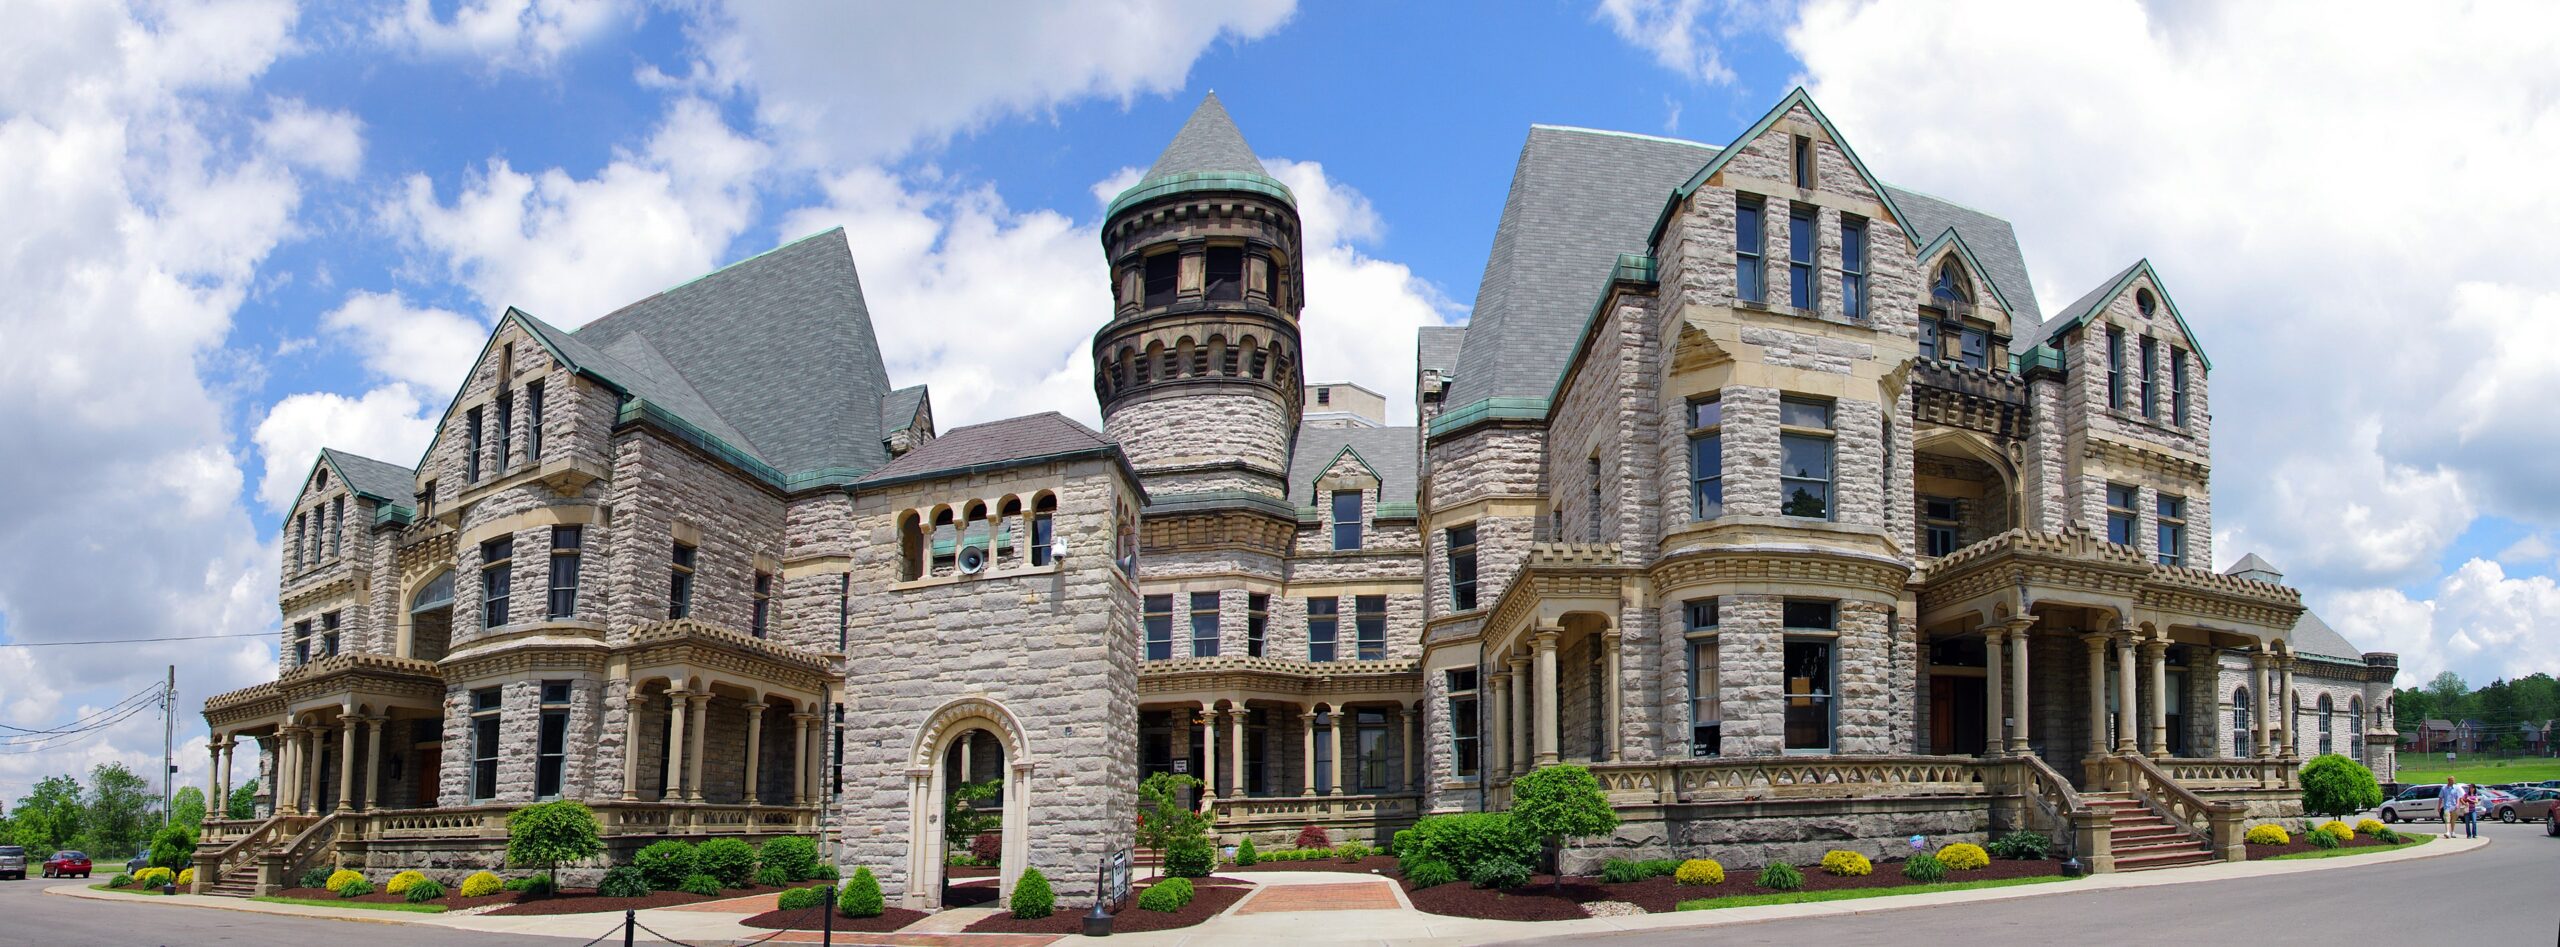 Located in Mansfield, the Ohio State Reformatory is a popular haunted place in the U.S. The place is known for its brutal architecture and the inhumane conditions that its inmates face. Since the facility saw a great deal of violence and death, it resulted in the transformation of a haunted place.